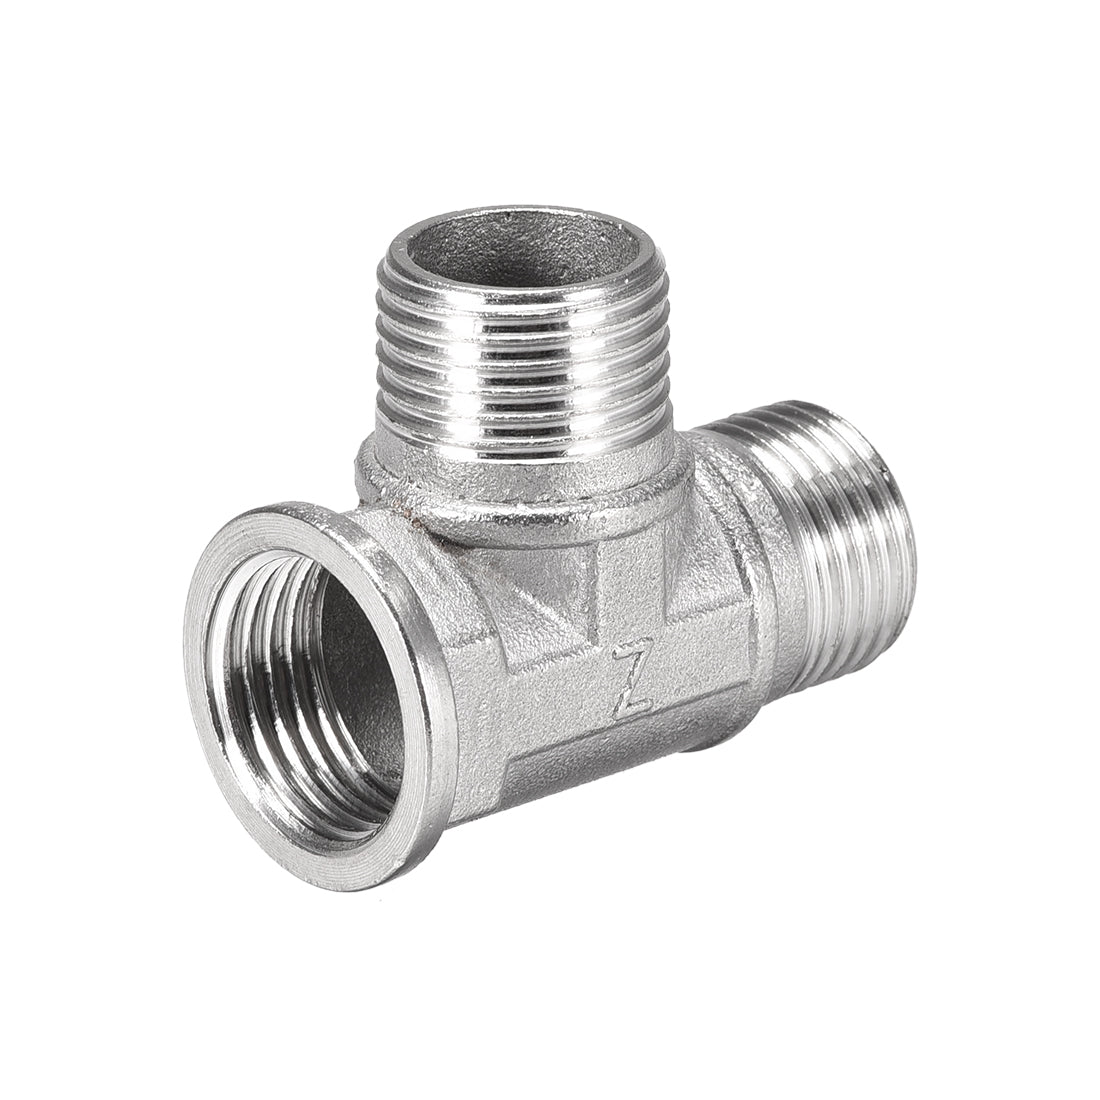 uxcell Uxcell Stainless Steel 304 Cast  Pipe Fitting G1/2 Male x G1/2 Male x G1/2 Female Tee Shaped Connector Coupler